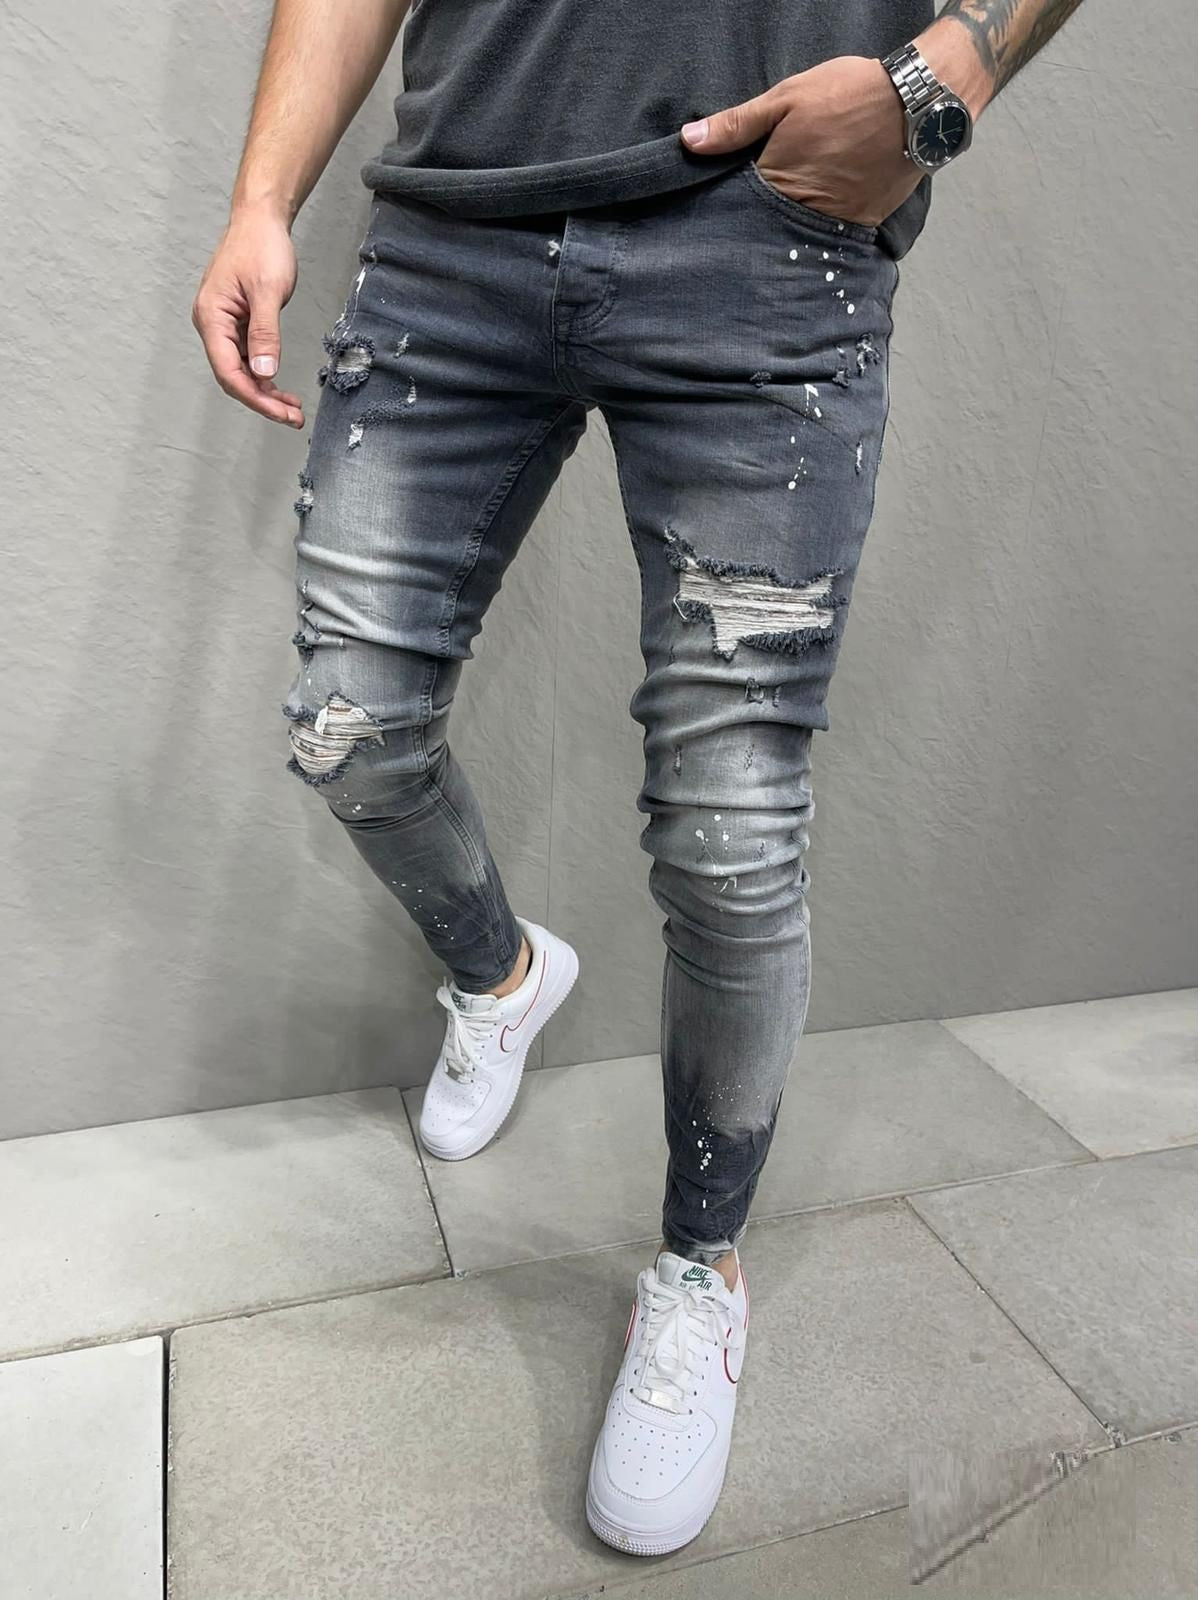 Mens Skinny Ripped Jeans Denim Pants Casual Stretch Slim Fit Hip Hop  Trousers